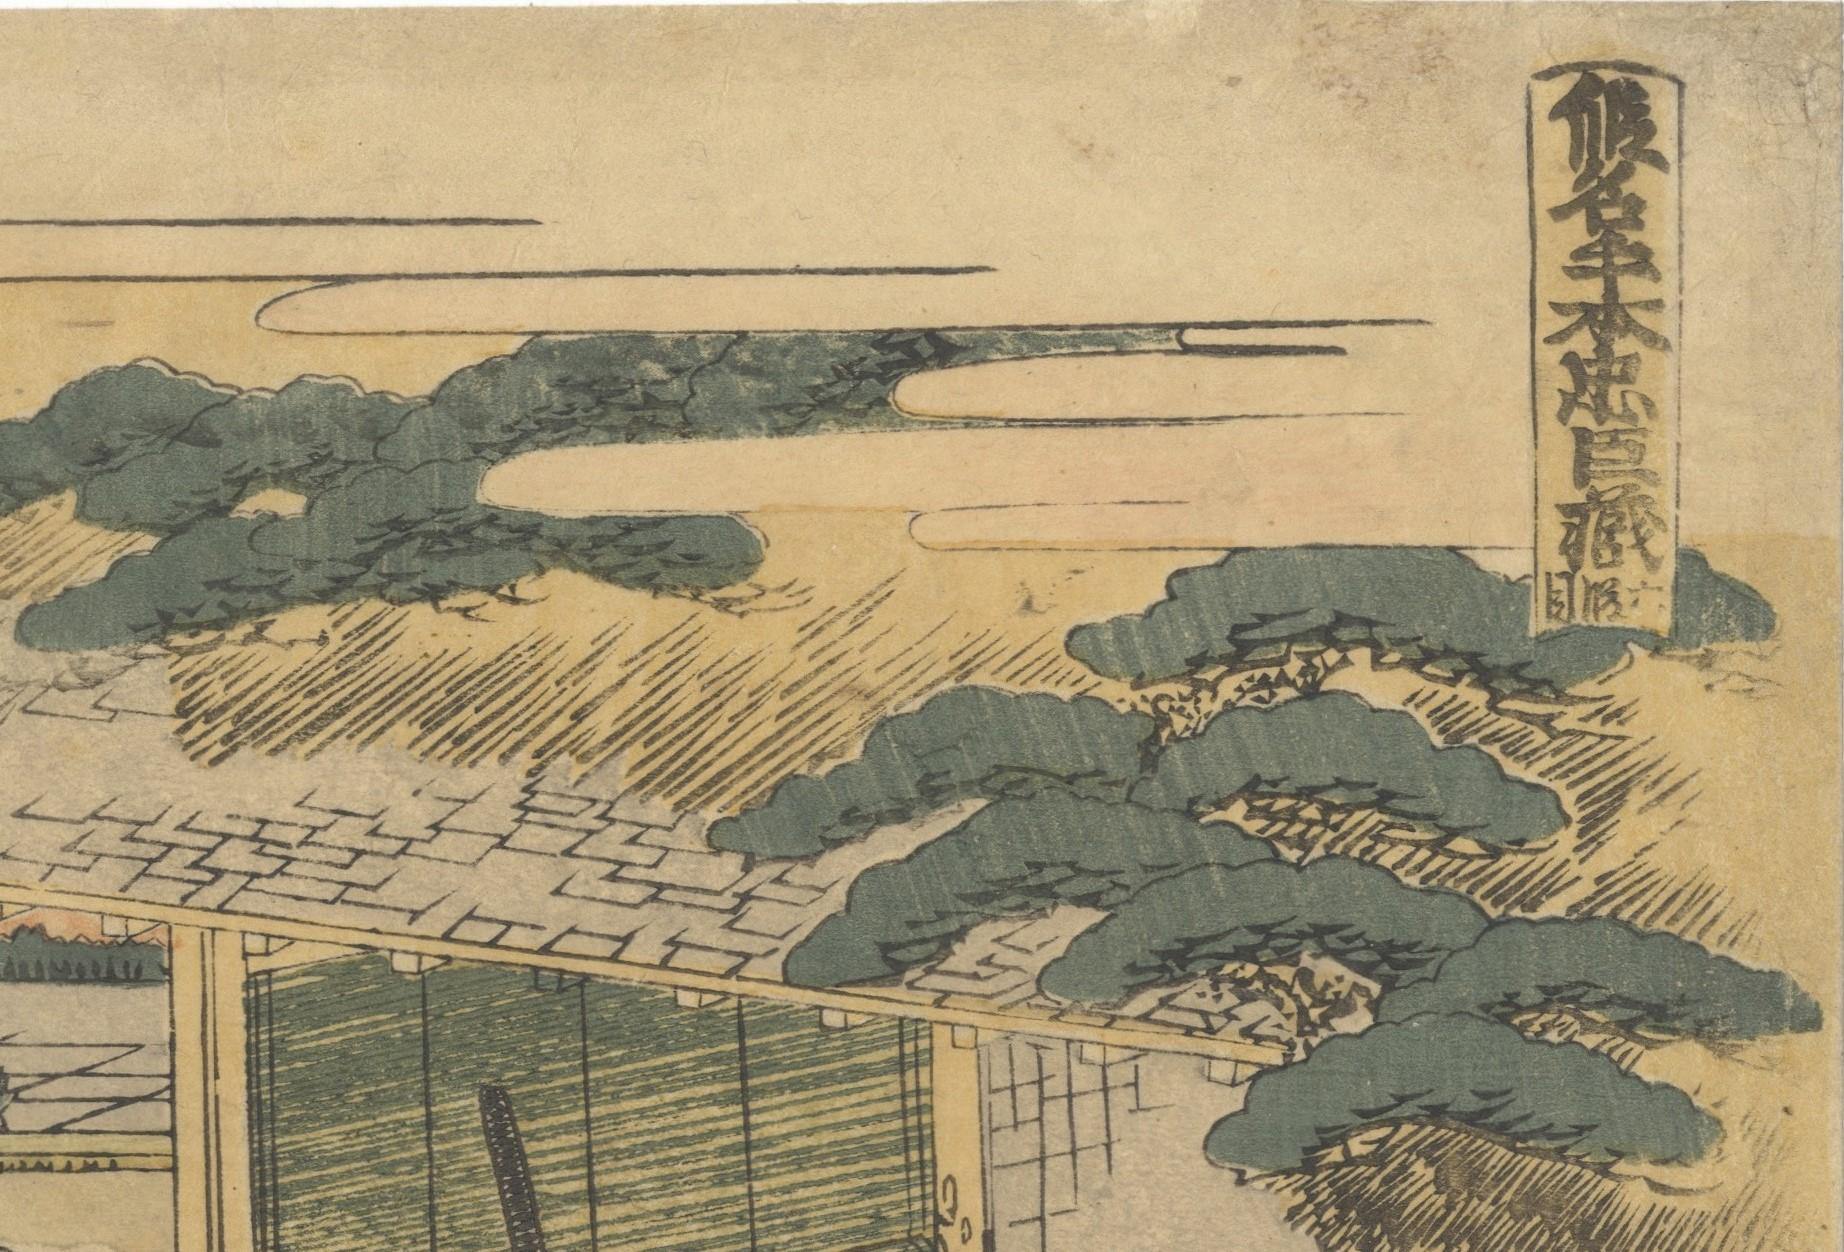 Artist: Hokusai Katsushika (1760-1849)
Title: Act VI
Series: The Storehouse of Loyal Retainers (Kanadehon Chushingura)
Date: c. 1805
Size: 25.6 x 36.8 cm
Condition report: Slightly trimmed, a pinhole on the top, minor stains and creases, some